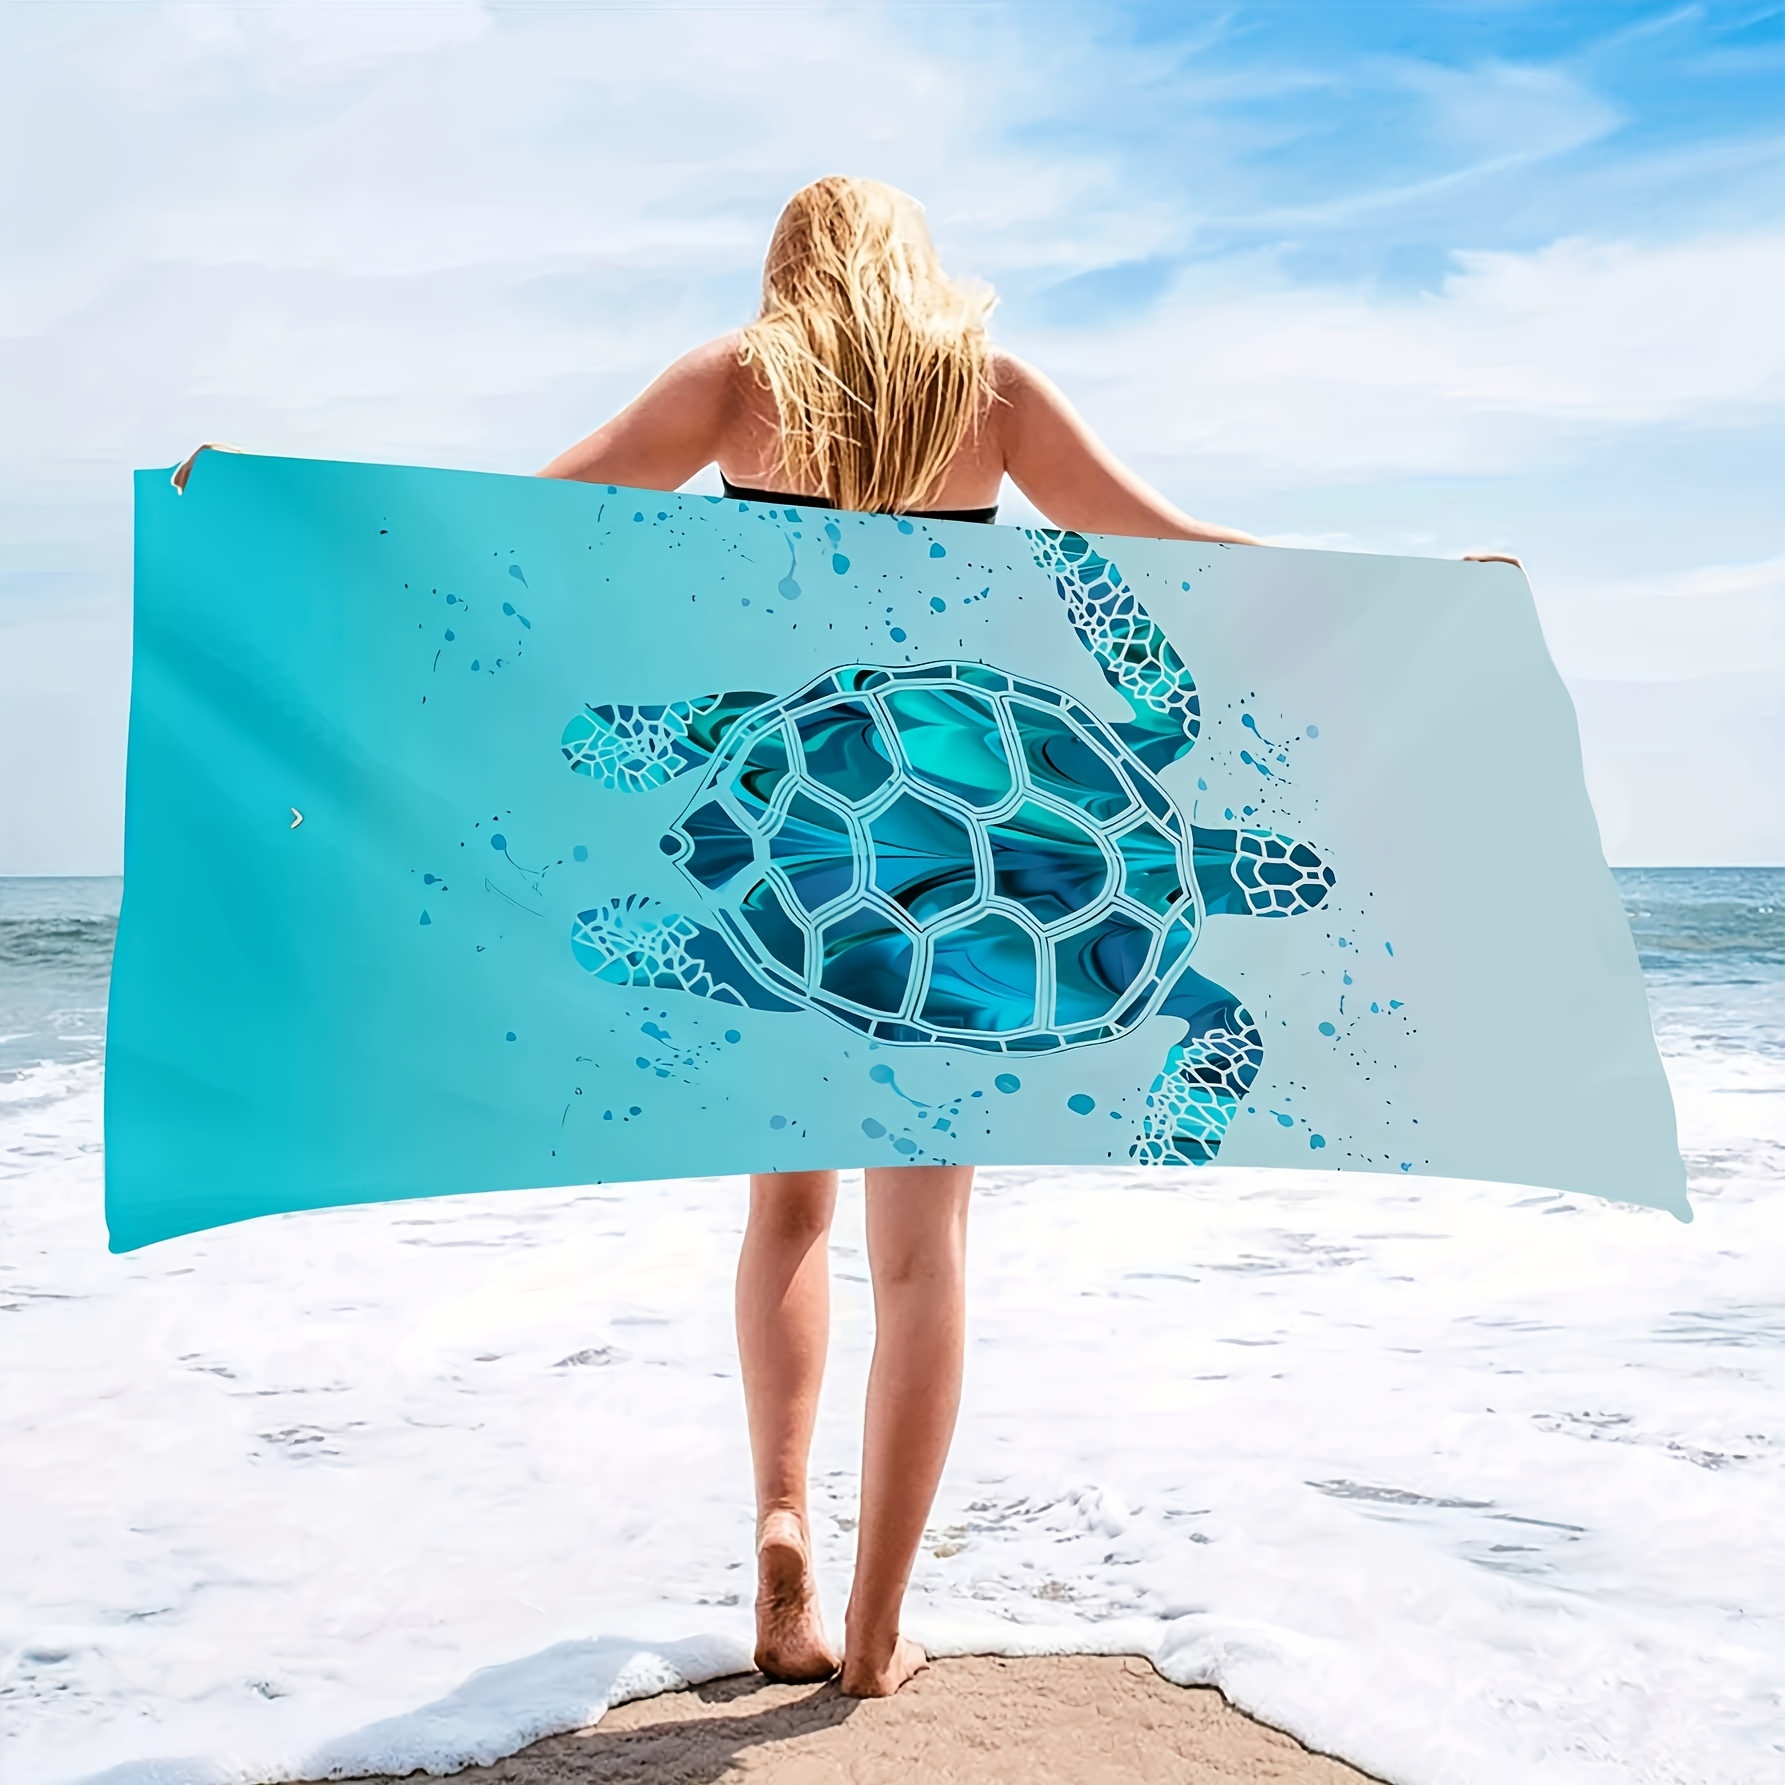  SYOURSELF Microfiber Beach Towel for Travel, 60x 30,Extra  Large Beach Towels,Quick Dry,Super Absorbent, Lightweight Sand Free Towel  for Pool, Swim, Water Sports, Gym, Camping,Outdoor,Picnic(Starry) : Sports  & Outdoors